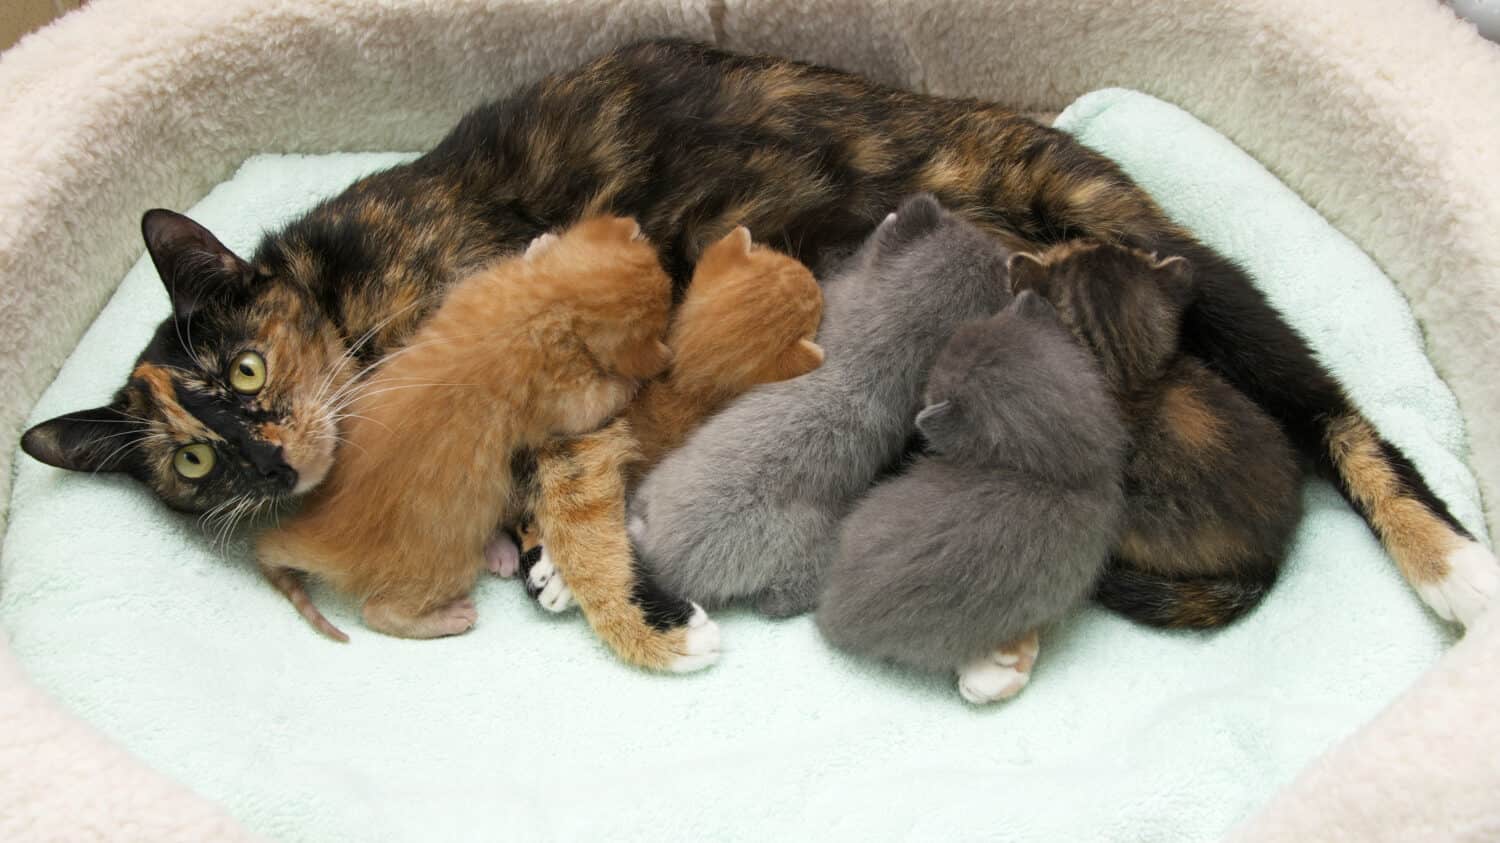 Mother torbie tortie tabby cat nursing five one week old kittens in a small pet bed with light green blanket